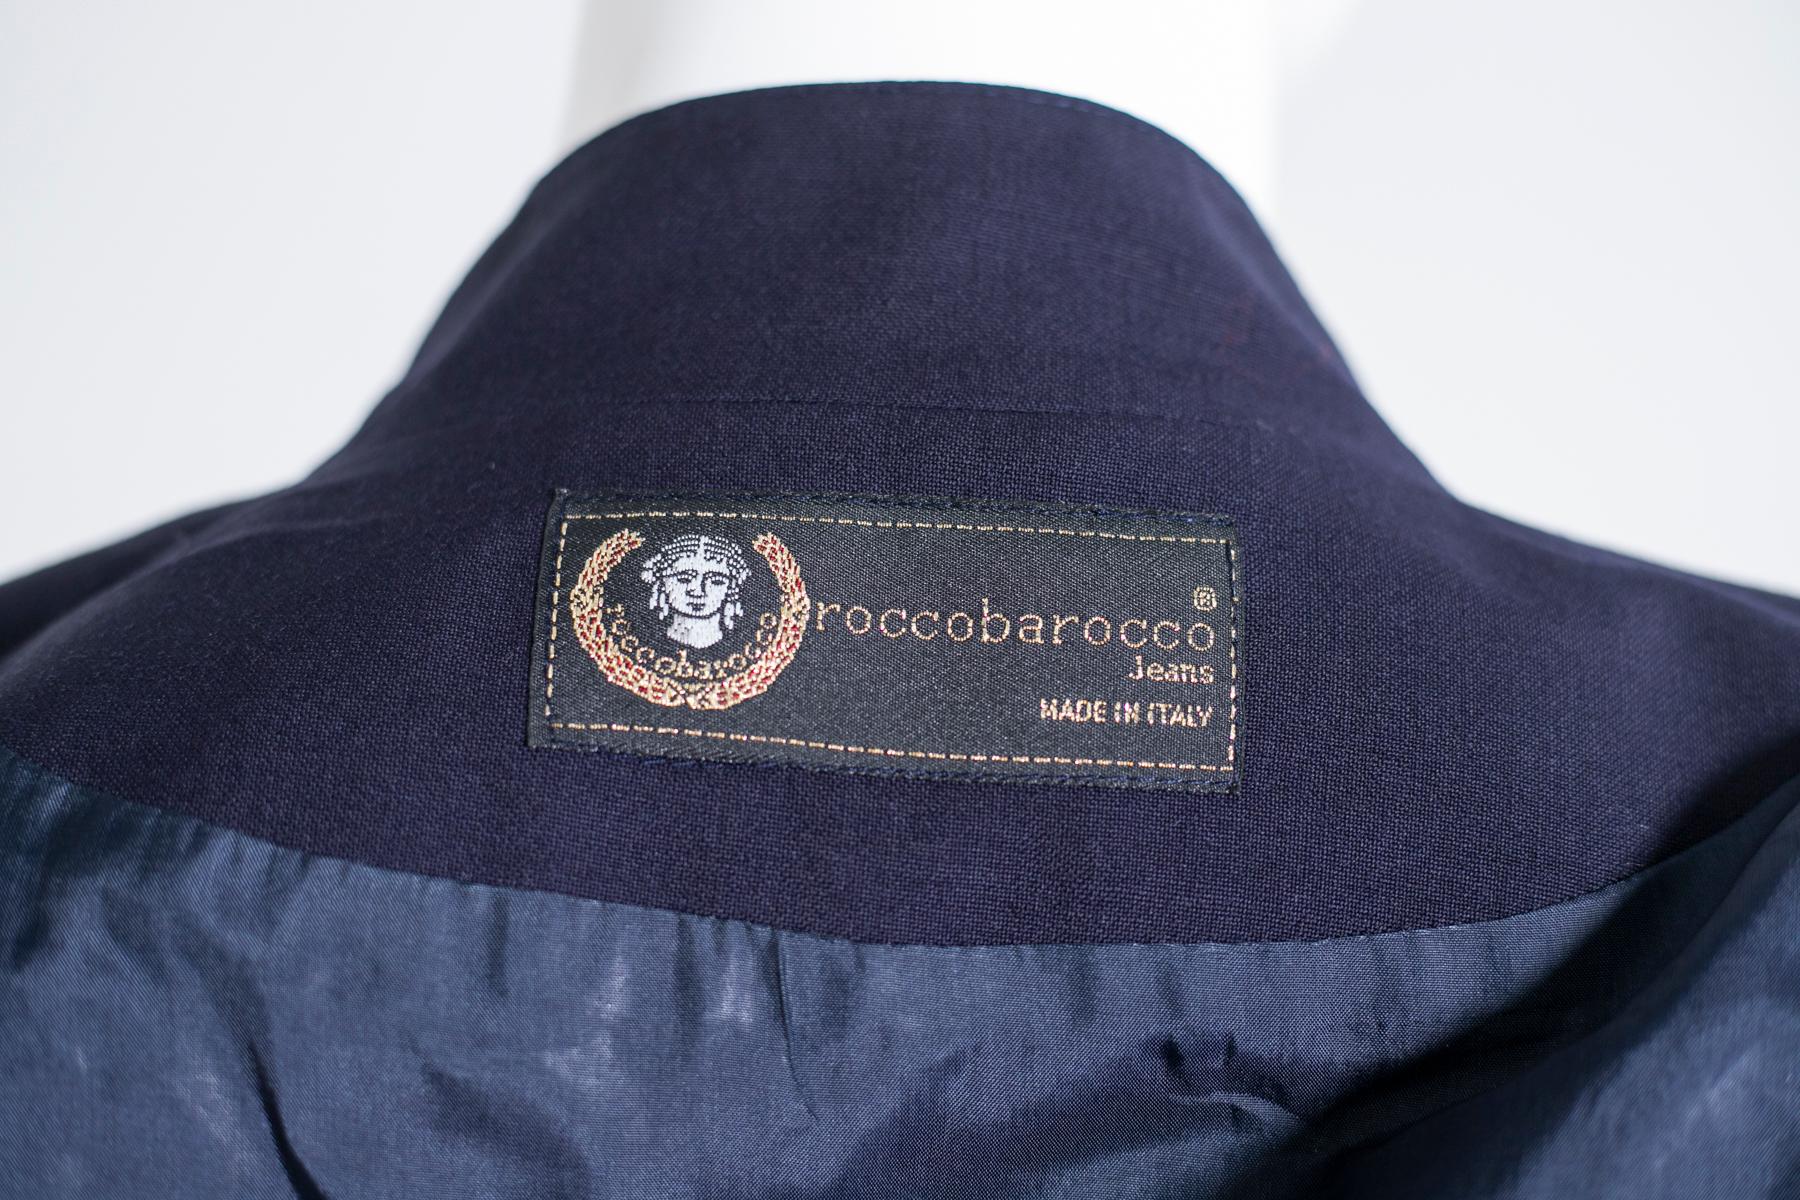 Beautiful short navy blue jacket by Rocco Barocco Jeans. The jacket is 100% wool and inside there is the Made in Italy label. Very elegant line, reminiscent of the jackets of the 80s with the padding on the shoulder. On the front there is the Rocco